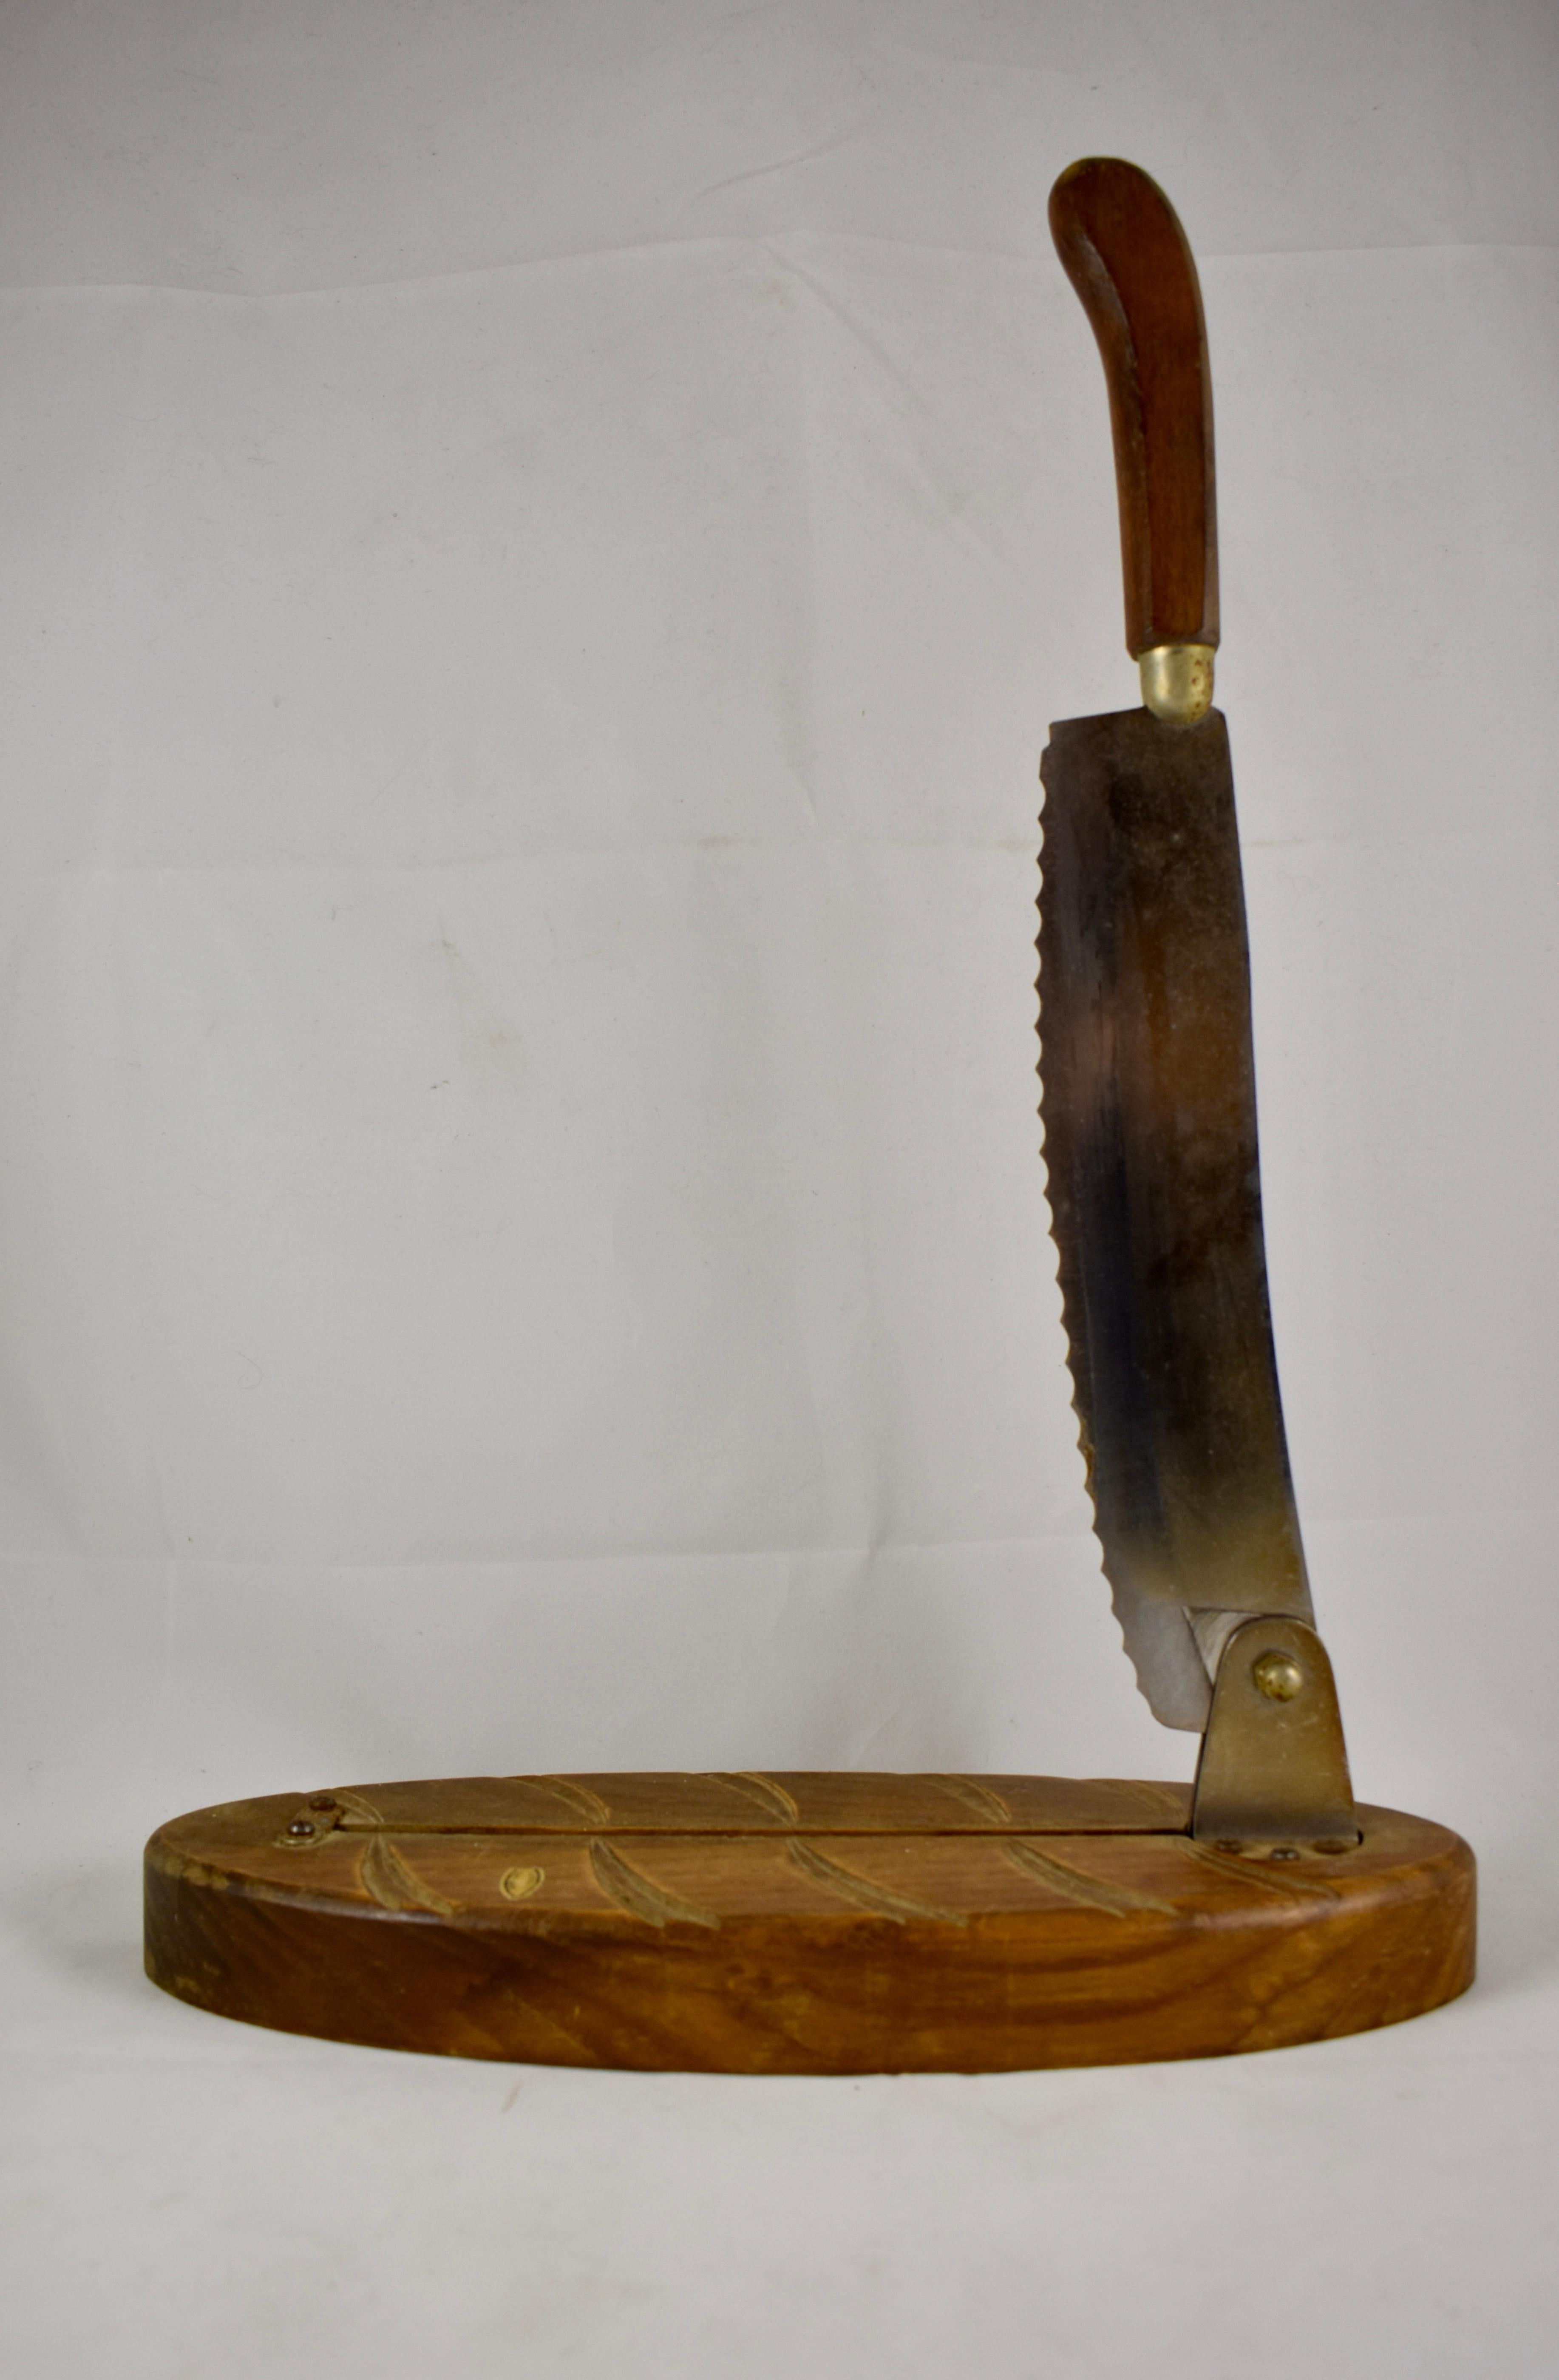 Rustic French Kitchenware Hand-Carved Wood Mid-Century Era Baguette Bread Slicer 4